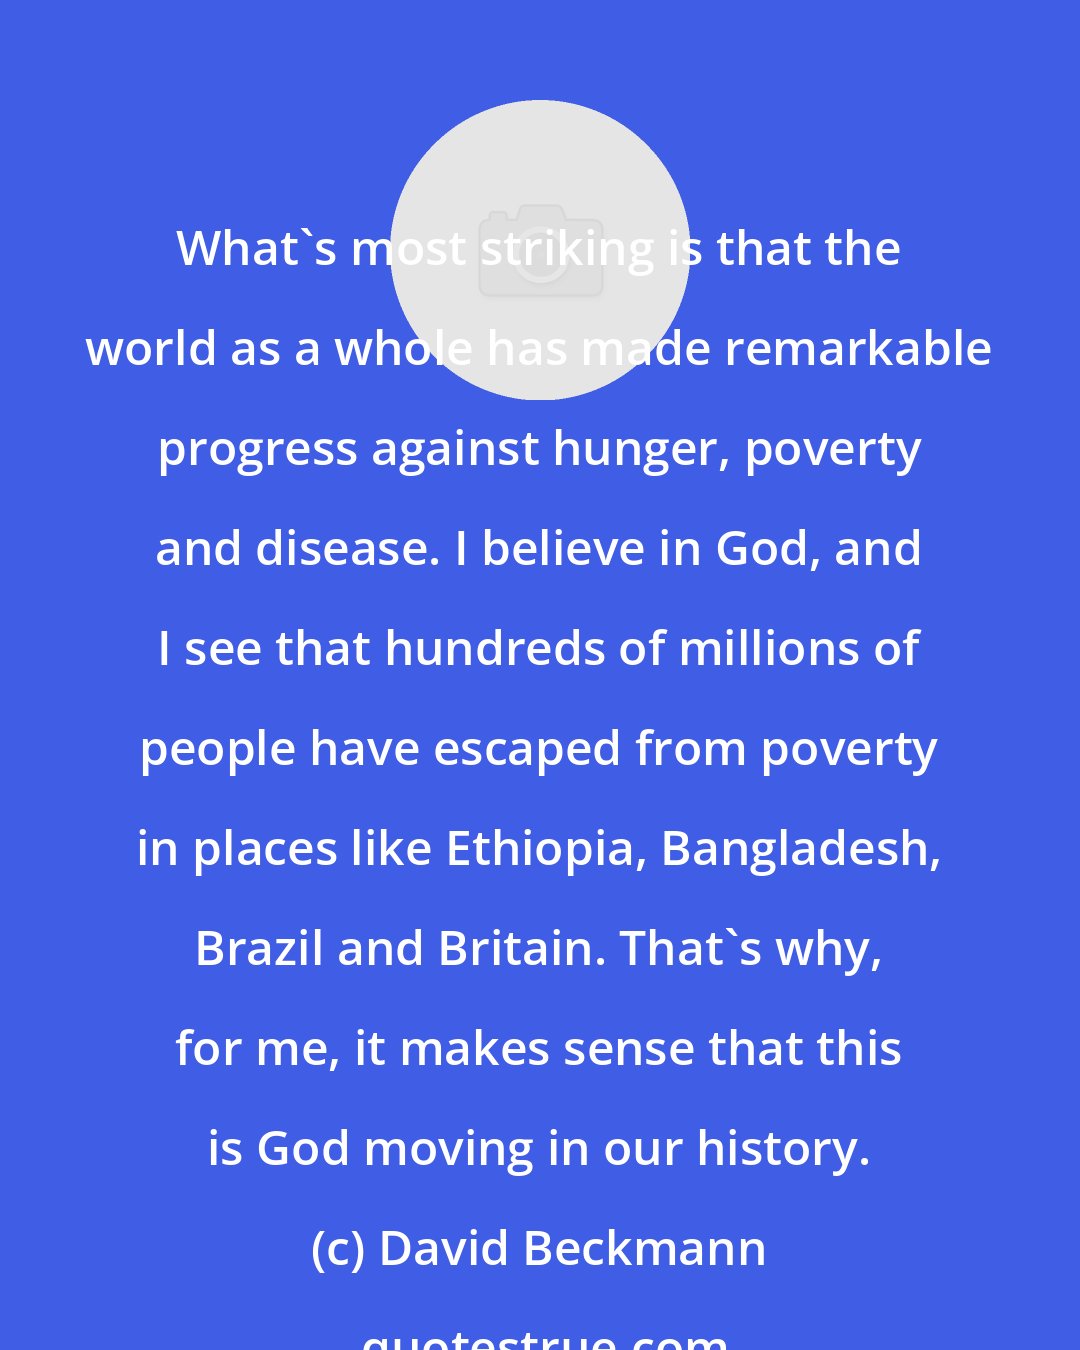 David Beckmann: What's most striking is that the world as a whole has made remarkable progress against hunger, poverty and disease. I believe in God, and I see that hundreds of millions of people have escaped from poverty in places like Ethiopia, Bangladesh, Brazil and Britain. That's why, for me, it makes sense that this is God moving in our history.